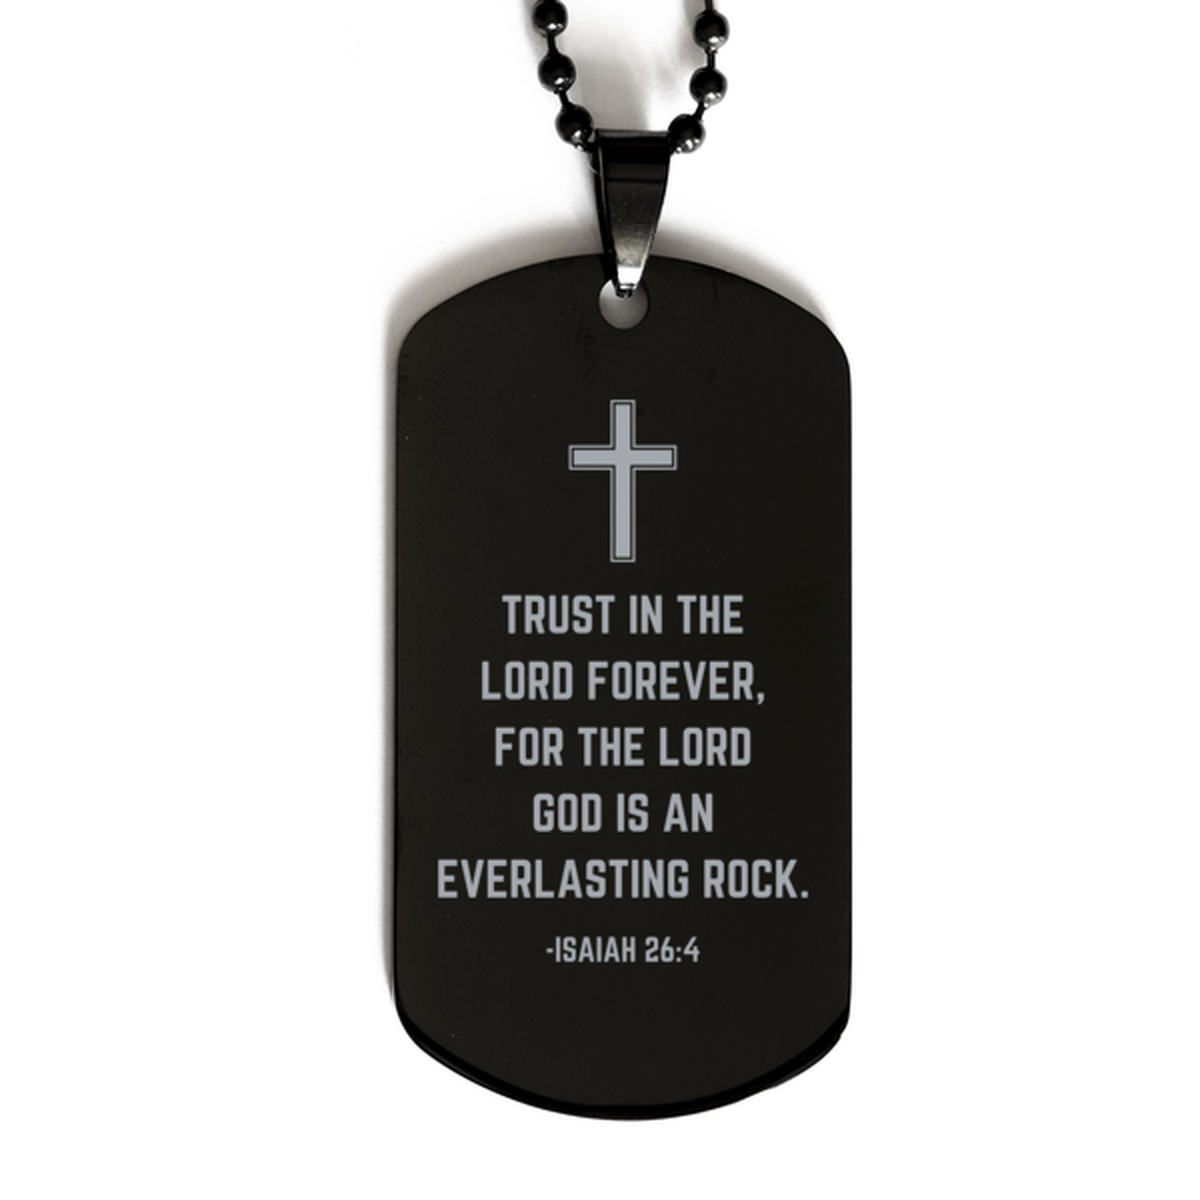 Baptism Gifts For Teenage Boys Girls, Christian Bible Verse Black Dog Tag, Trust in the Lord forever, Confirmation Gifts, Bible Verse Necklace for Son, Godson, Grandson, Nephew